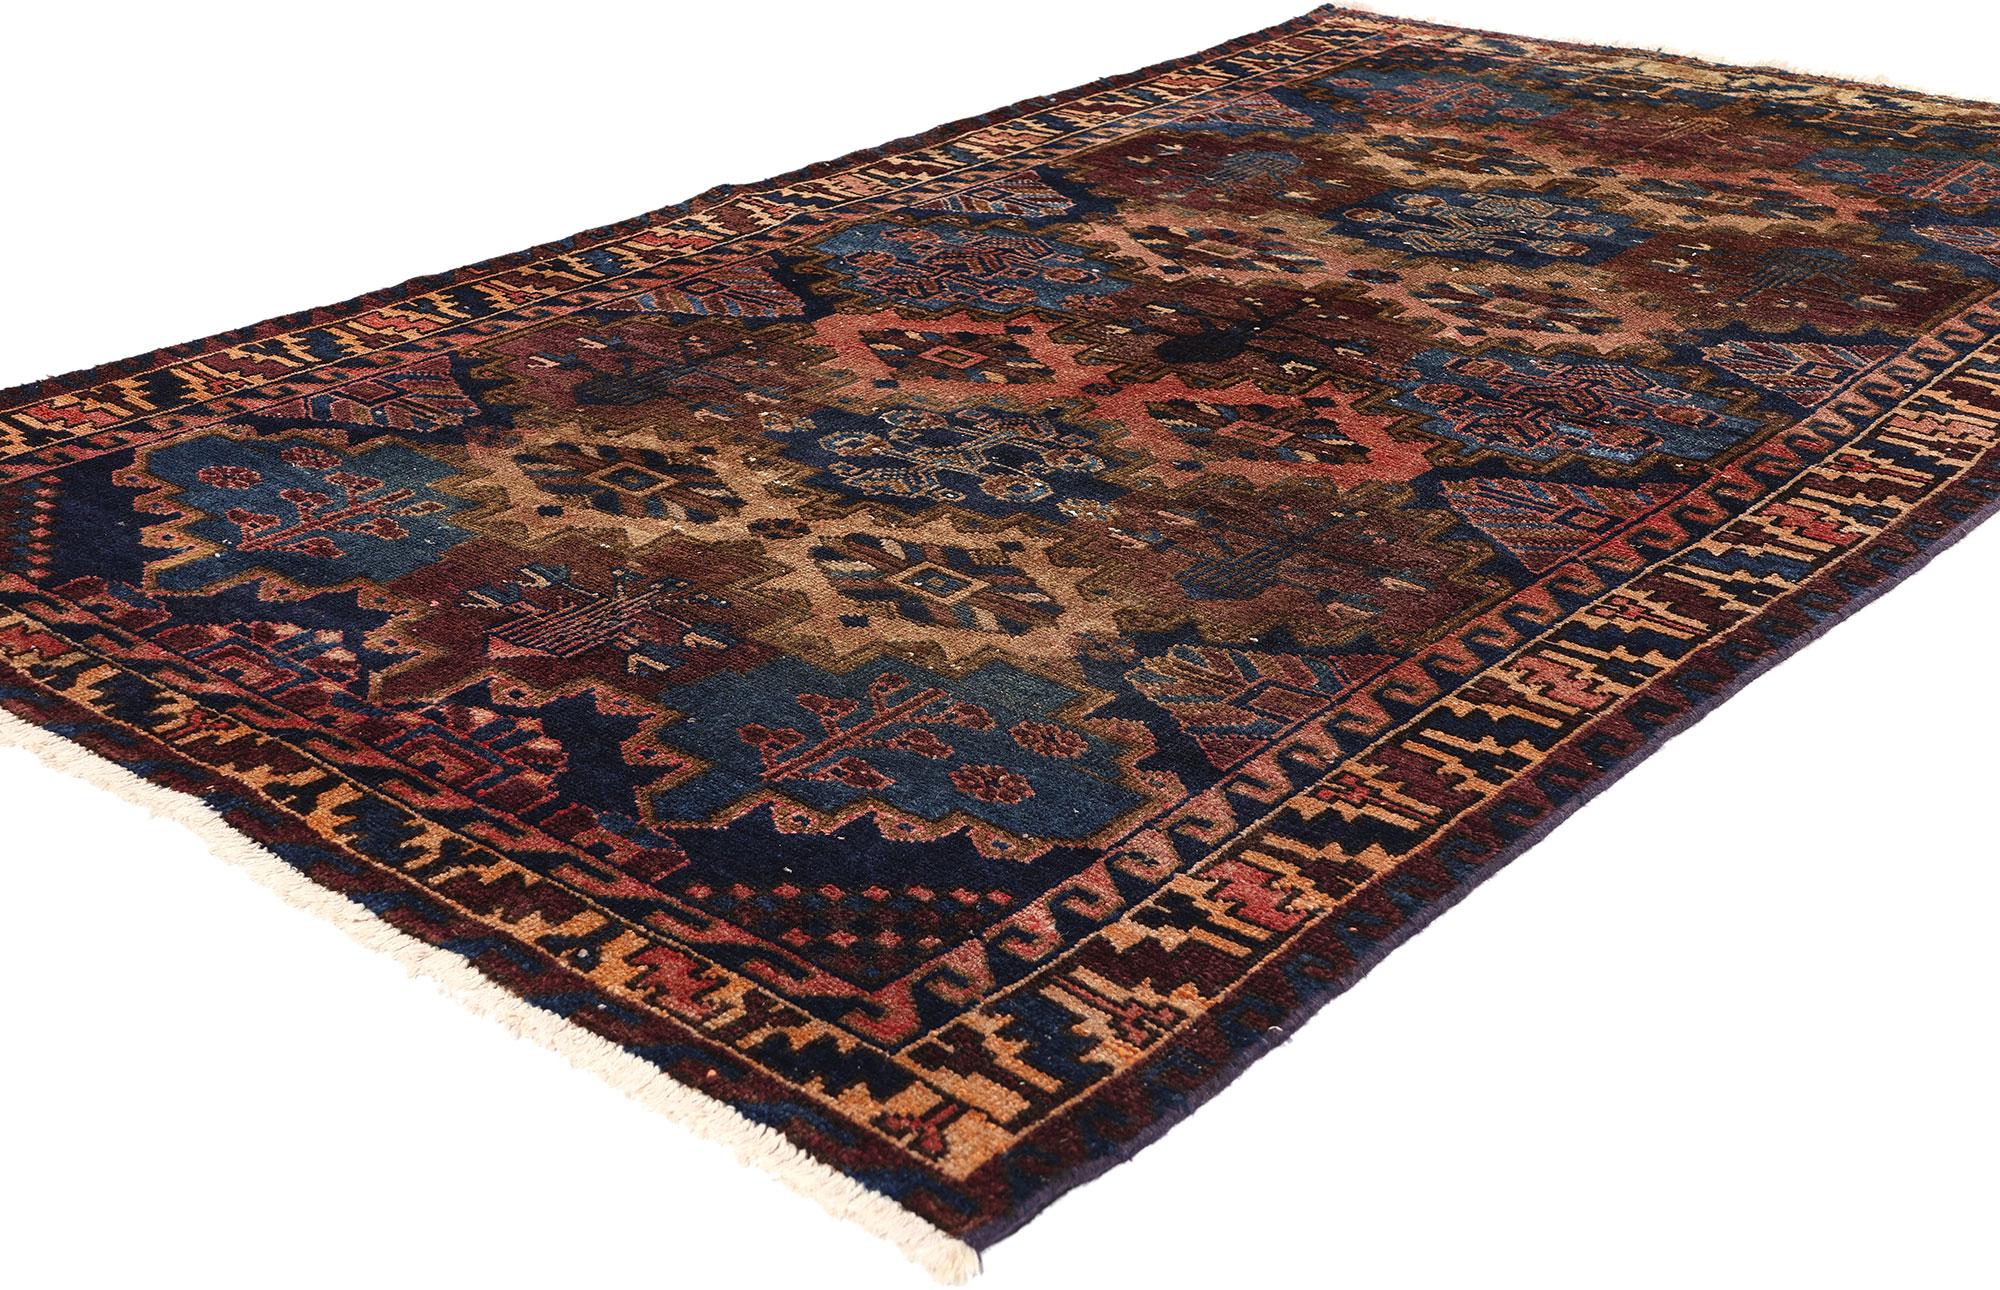 77680 Antique Persian Bakhtiari Rug, 04'09 x 08'00. Emerging from the rugged terrain of the Zagros Mountains in Iran, Persian Bakhtiari rugs stand as revered symbols of unparalleled craftsmanship and cultural legacy. Guided by generations of